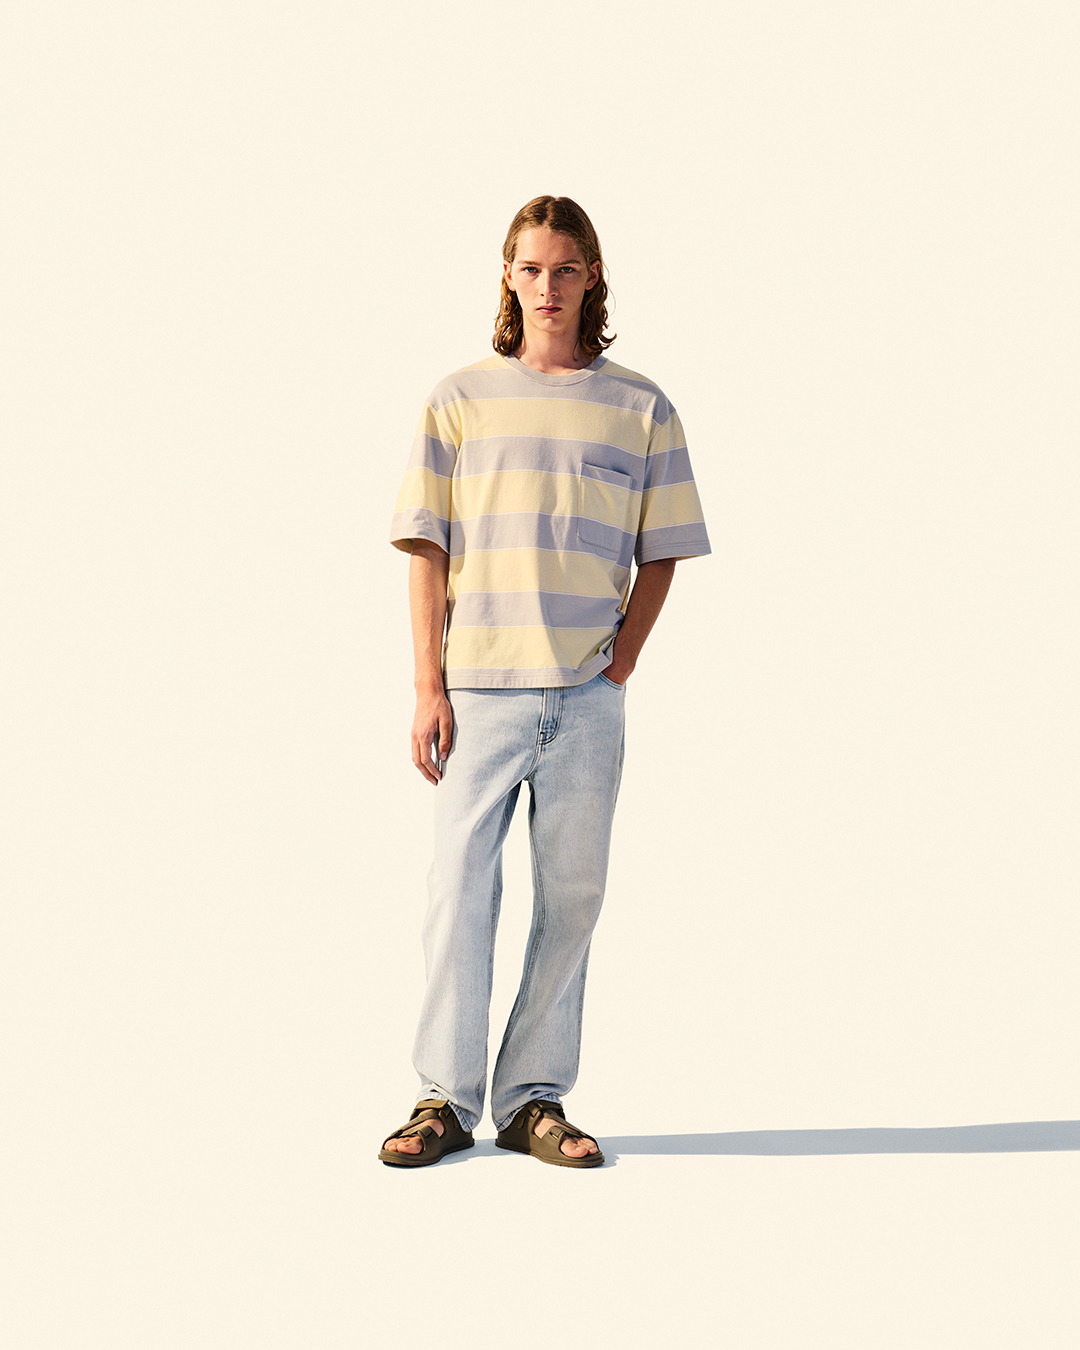 UNIQLO U by Christophe Lemaire SS23 Collection